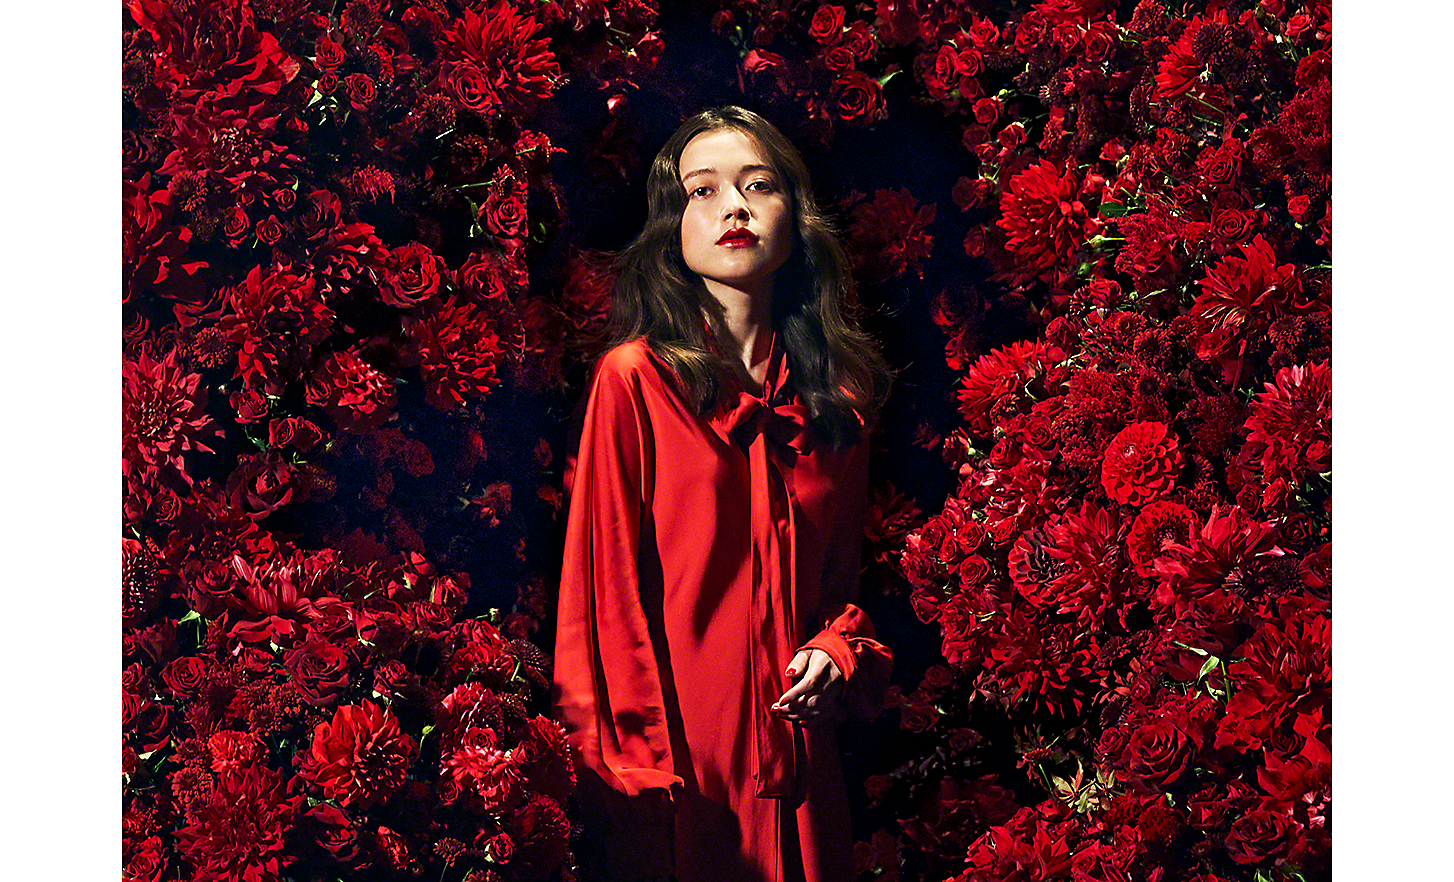 100mm shot of a woman dressed in red surrounded by red flowers